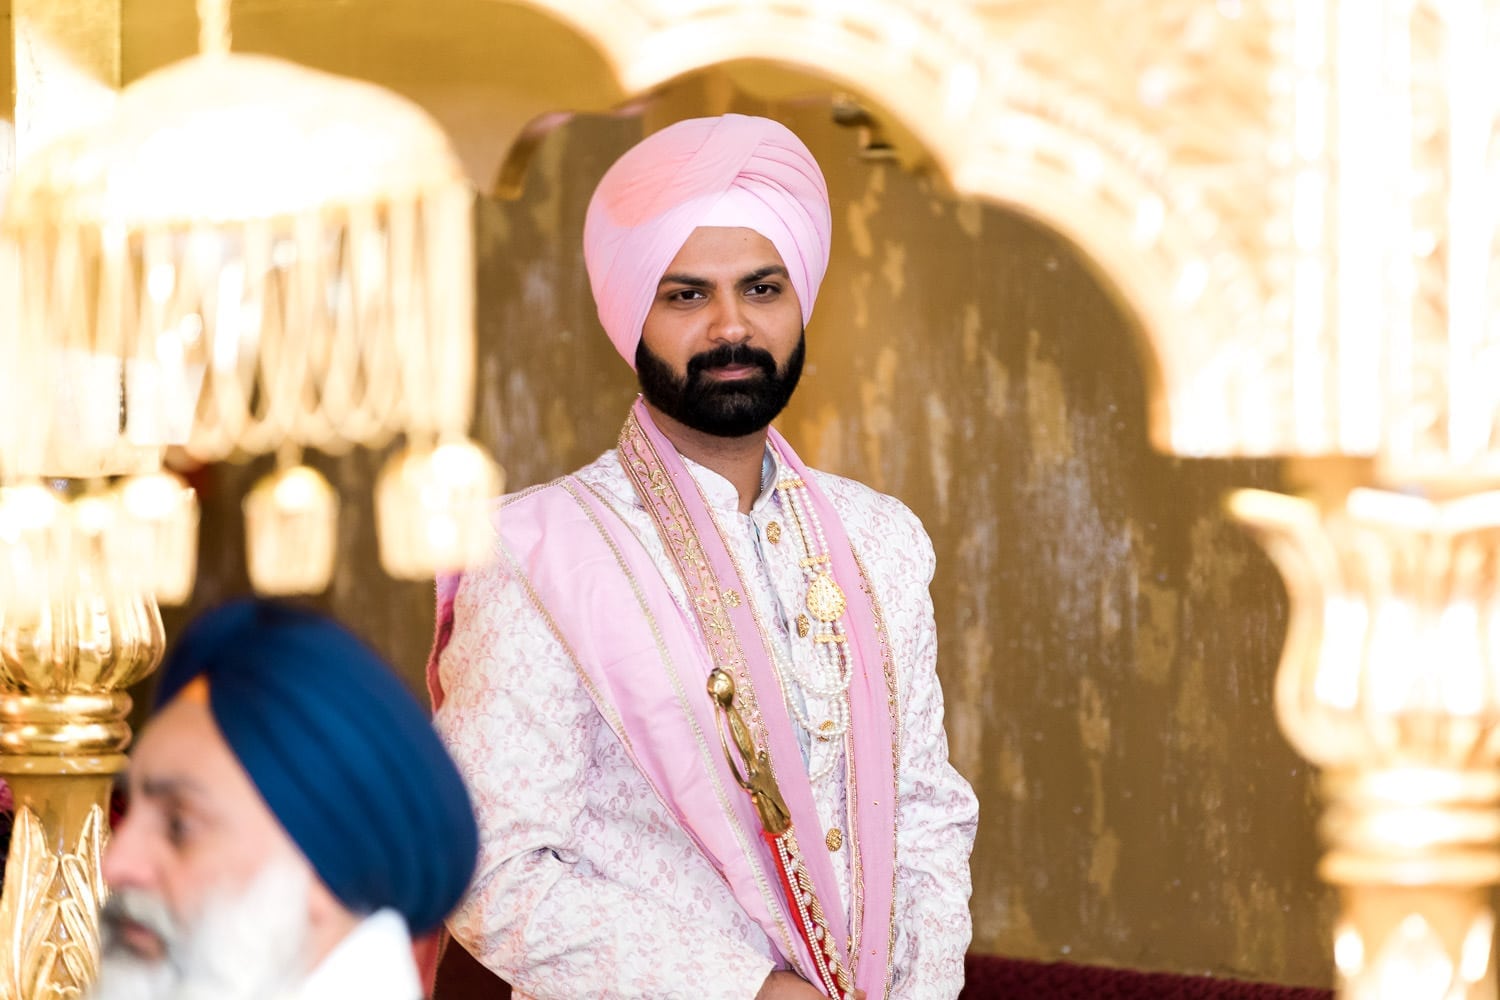 Indian groom at the temple | Indian wedding photography Vancouver